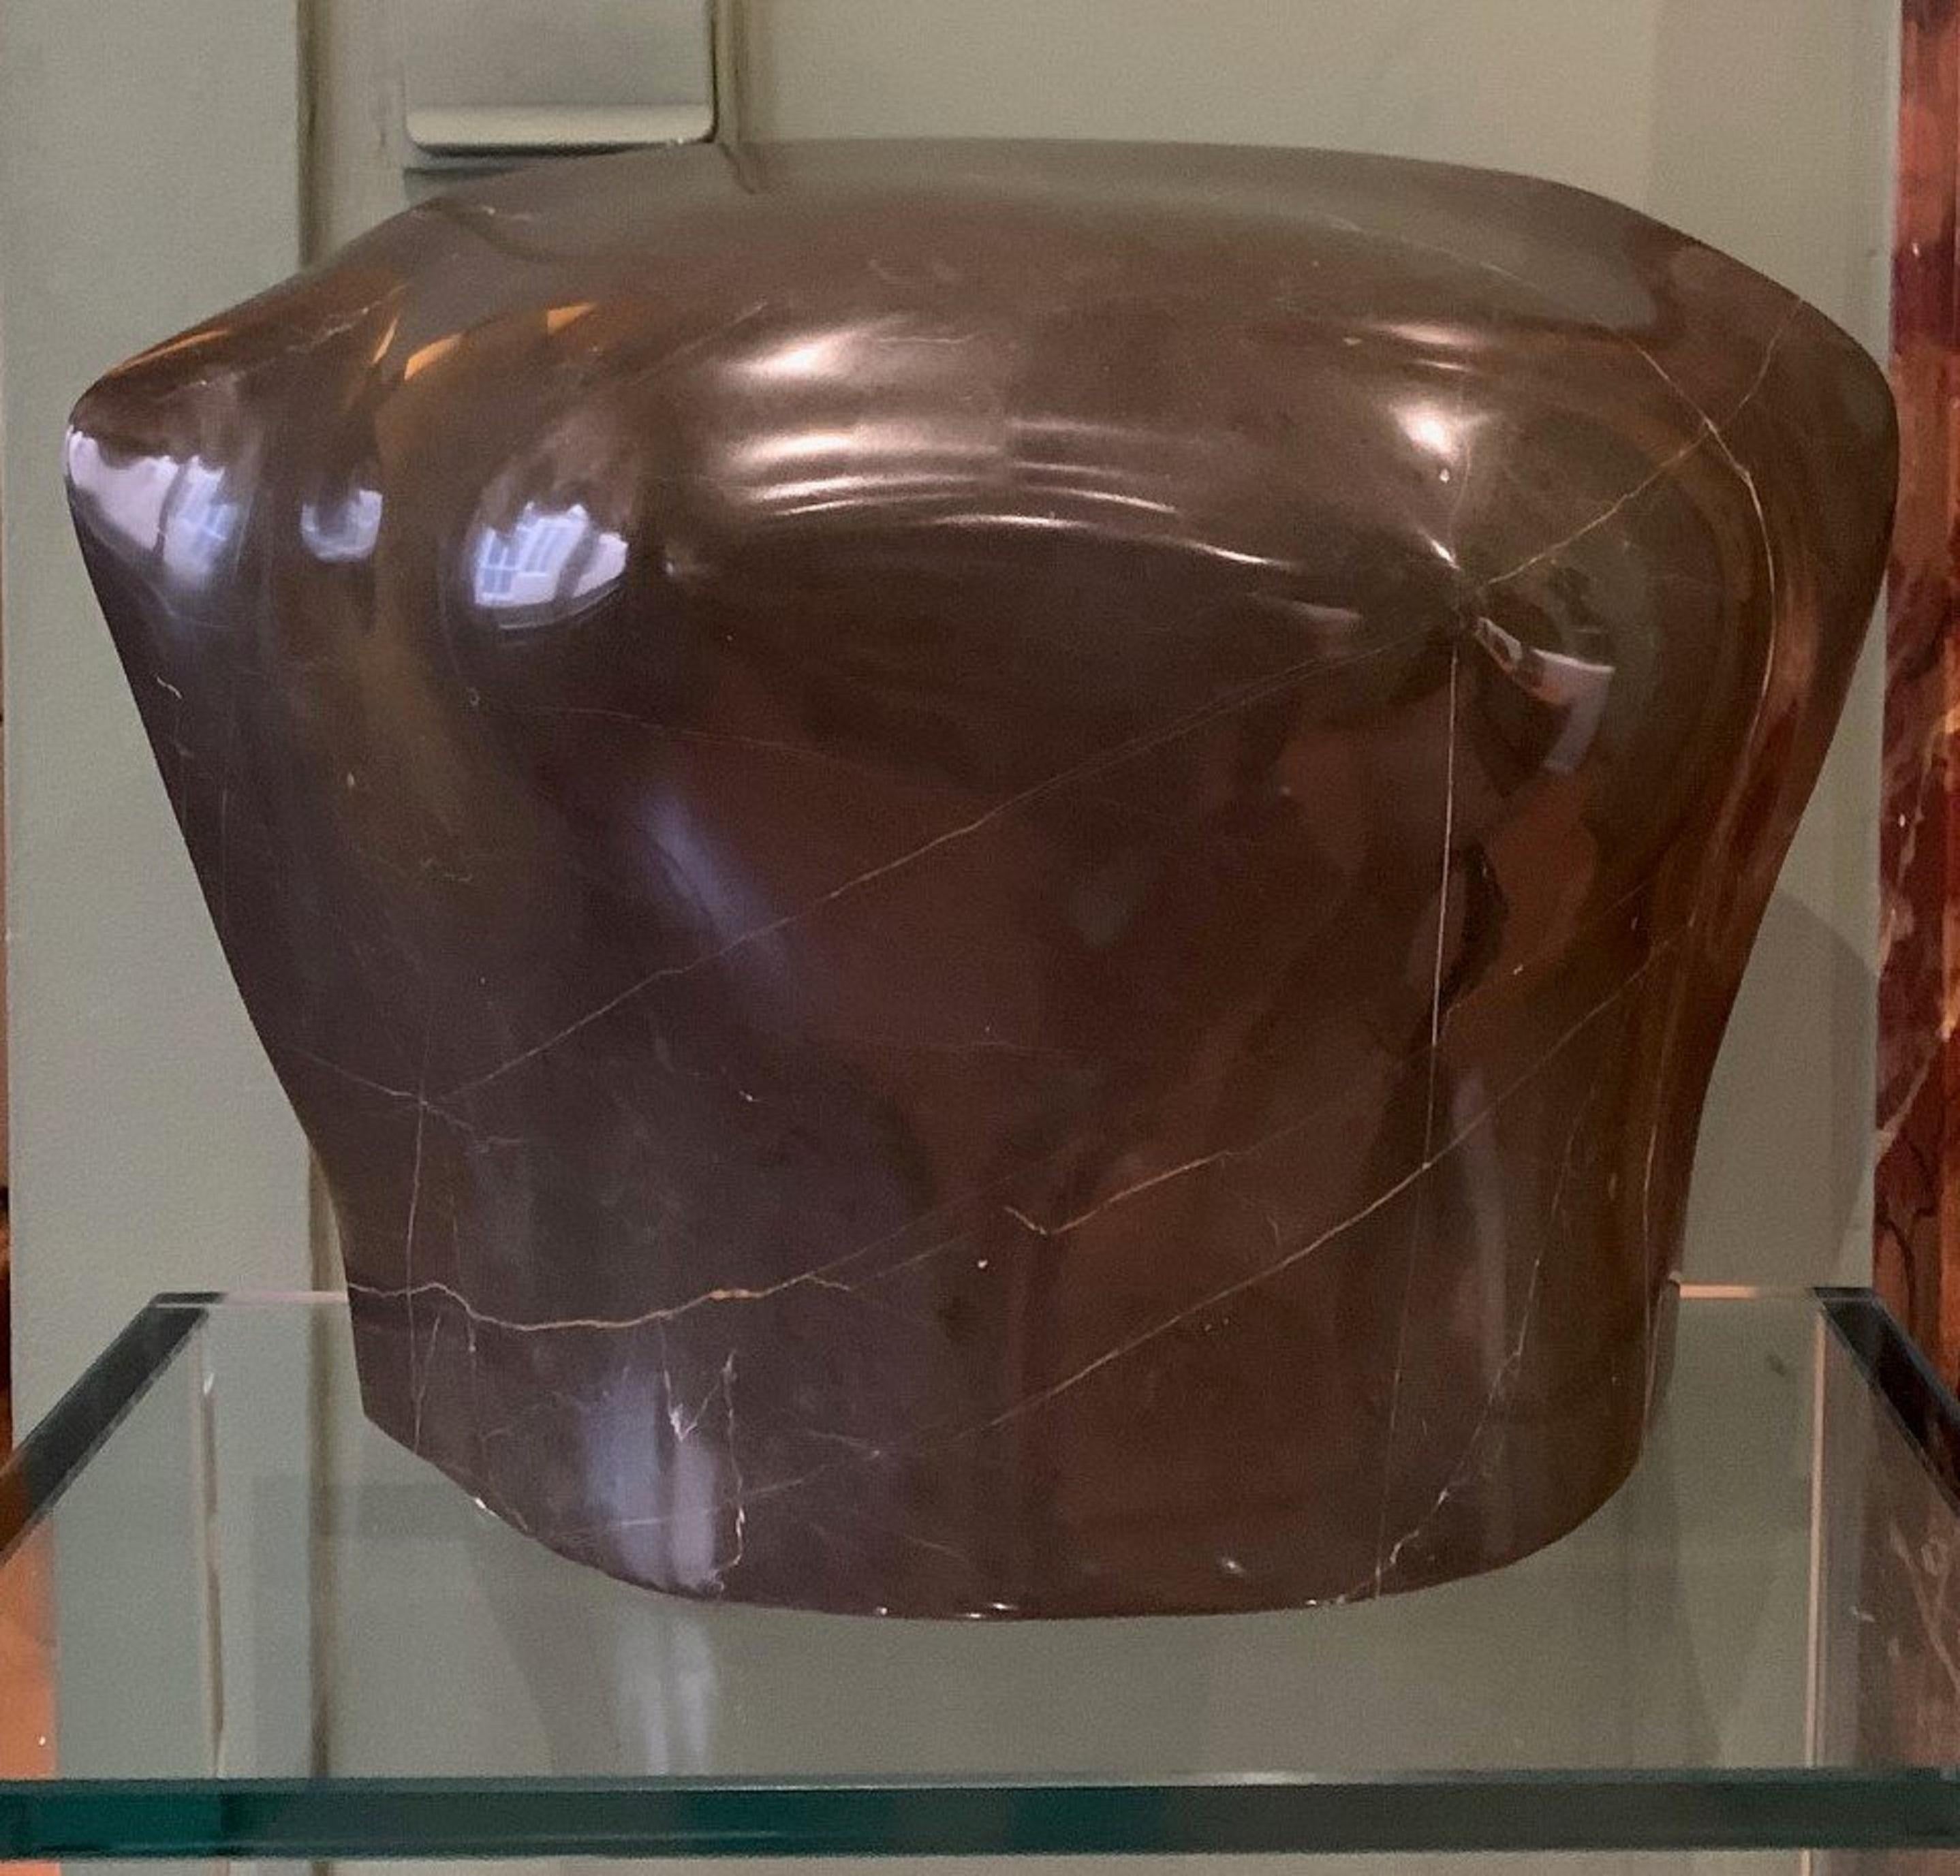 Modern sculpture in polished brown marble (a woman's torso?) on a transparent glass stand.
20th century period.
This Valencian artist, Vicente Orti (1947-), is famous and known for making many sculptures on noble materials: marble, stone, wrought